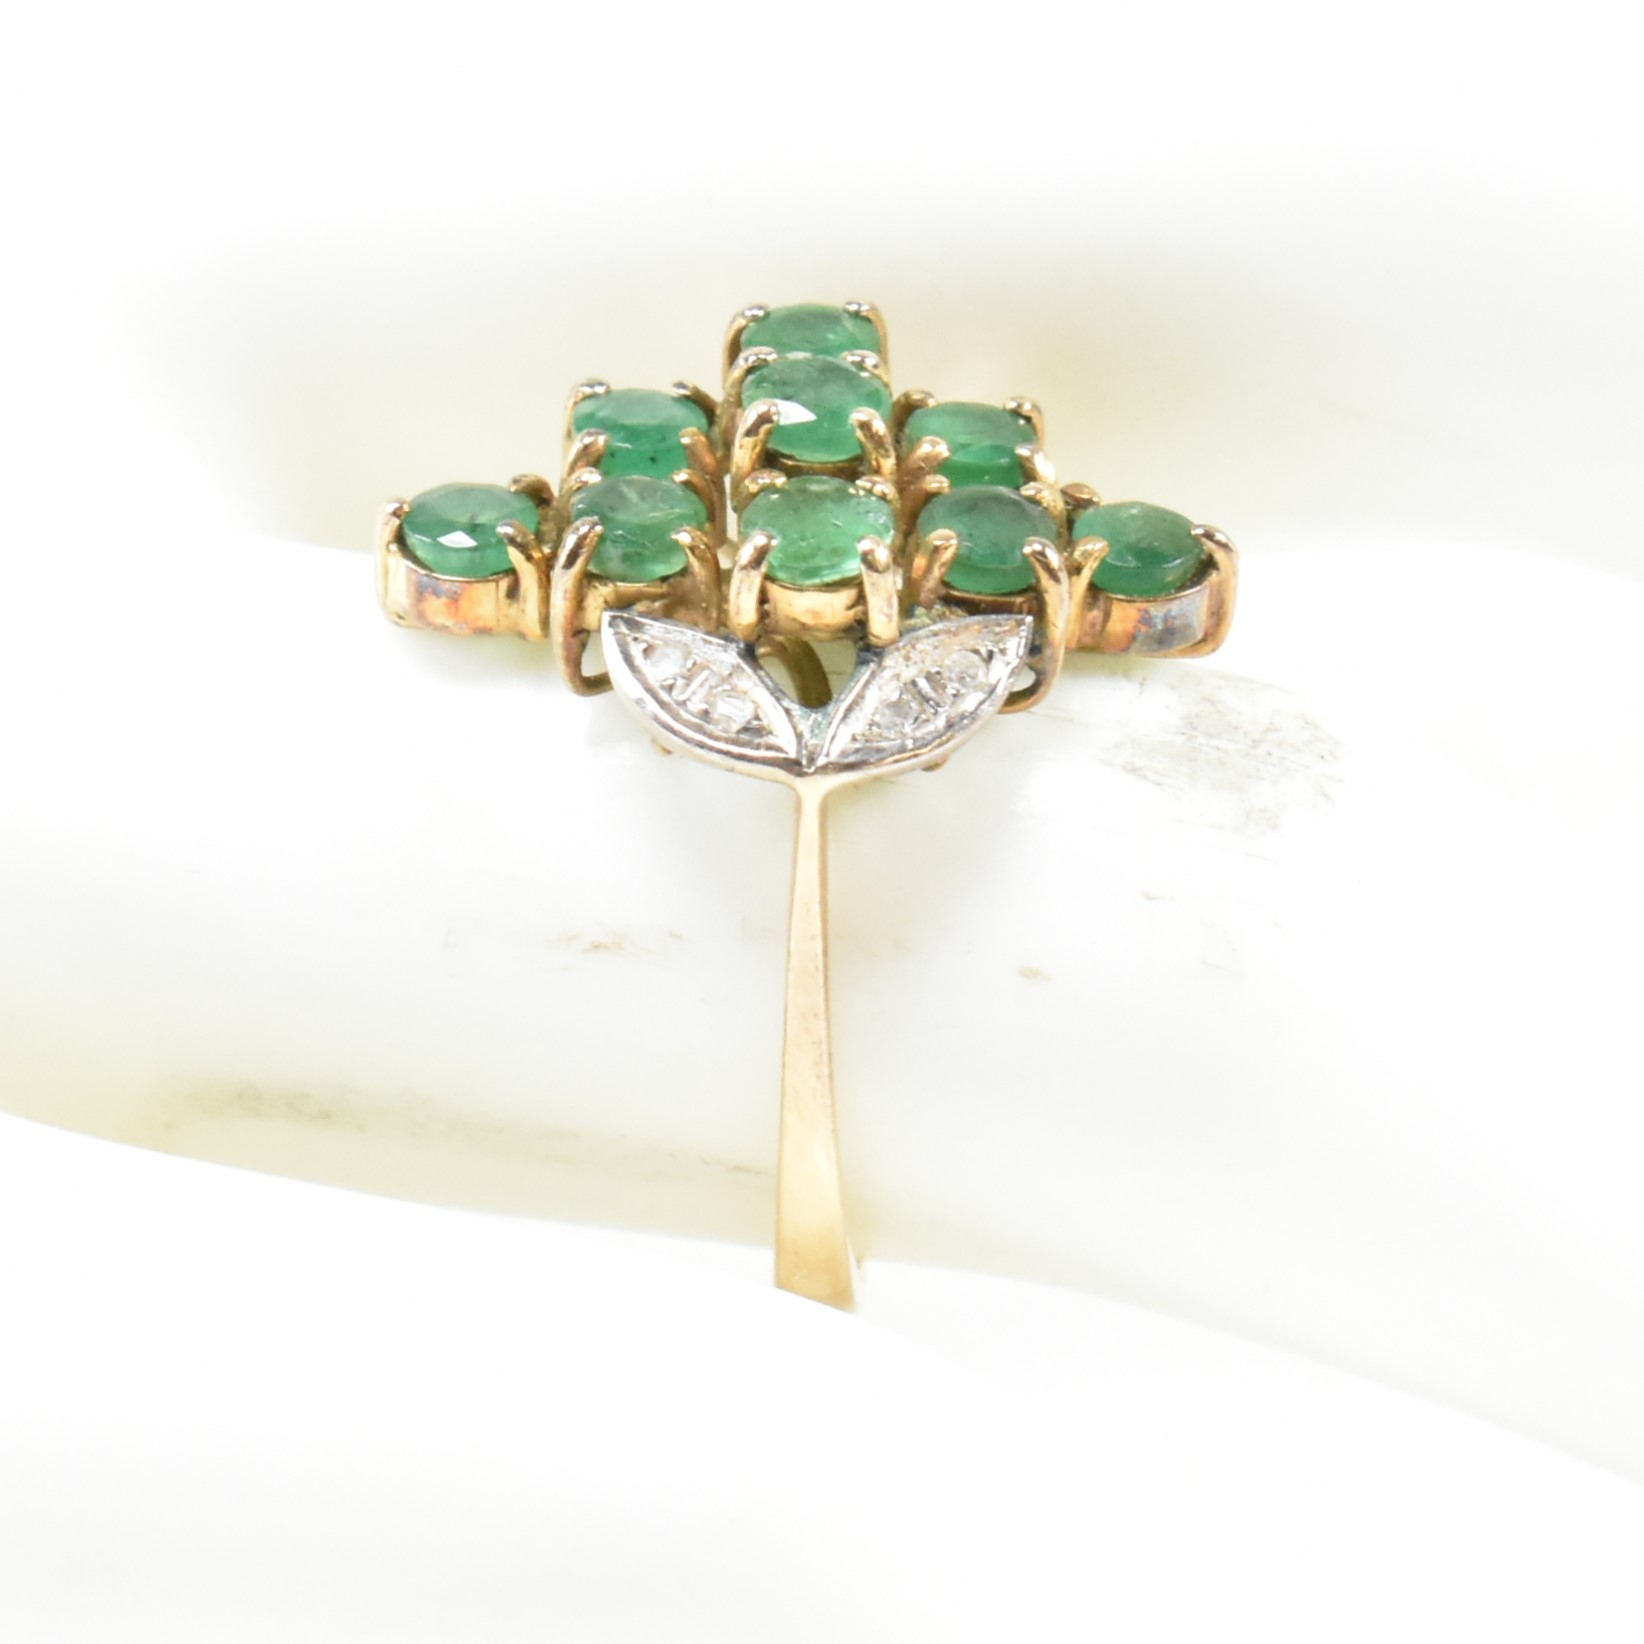 EMERALD & DIAMOND CLUSTER RING - Image 8 of 8